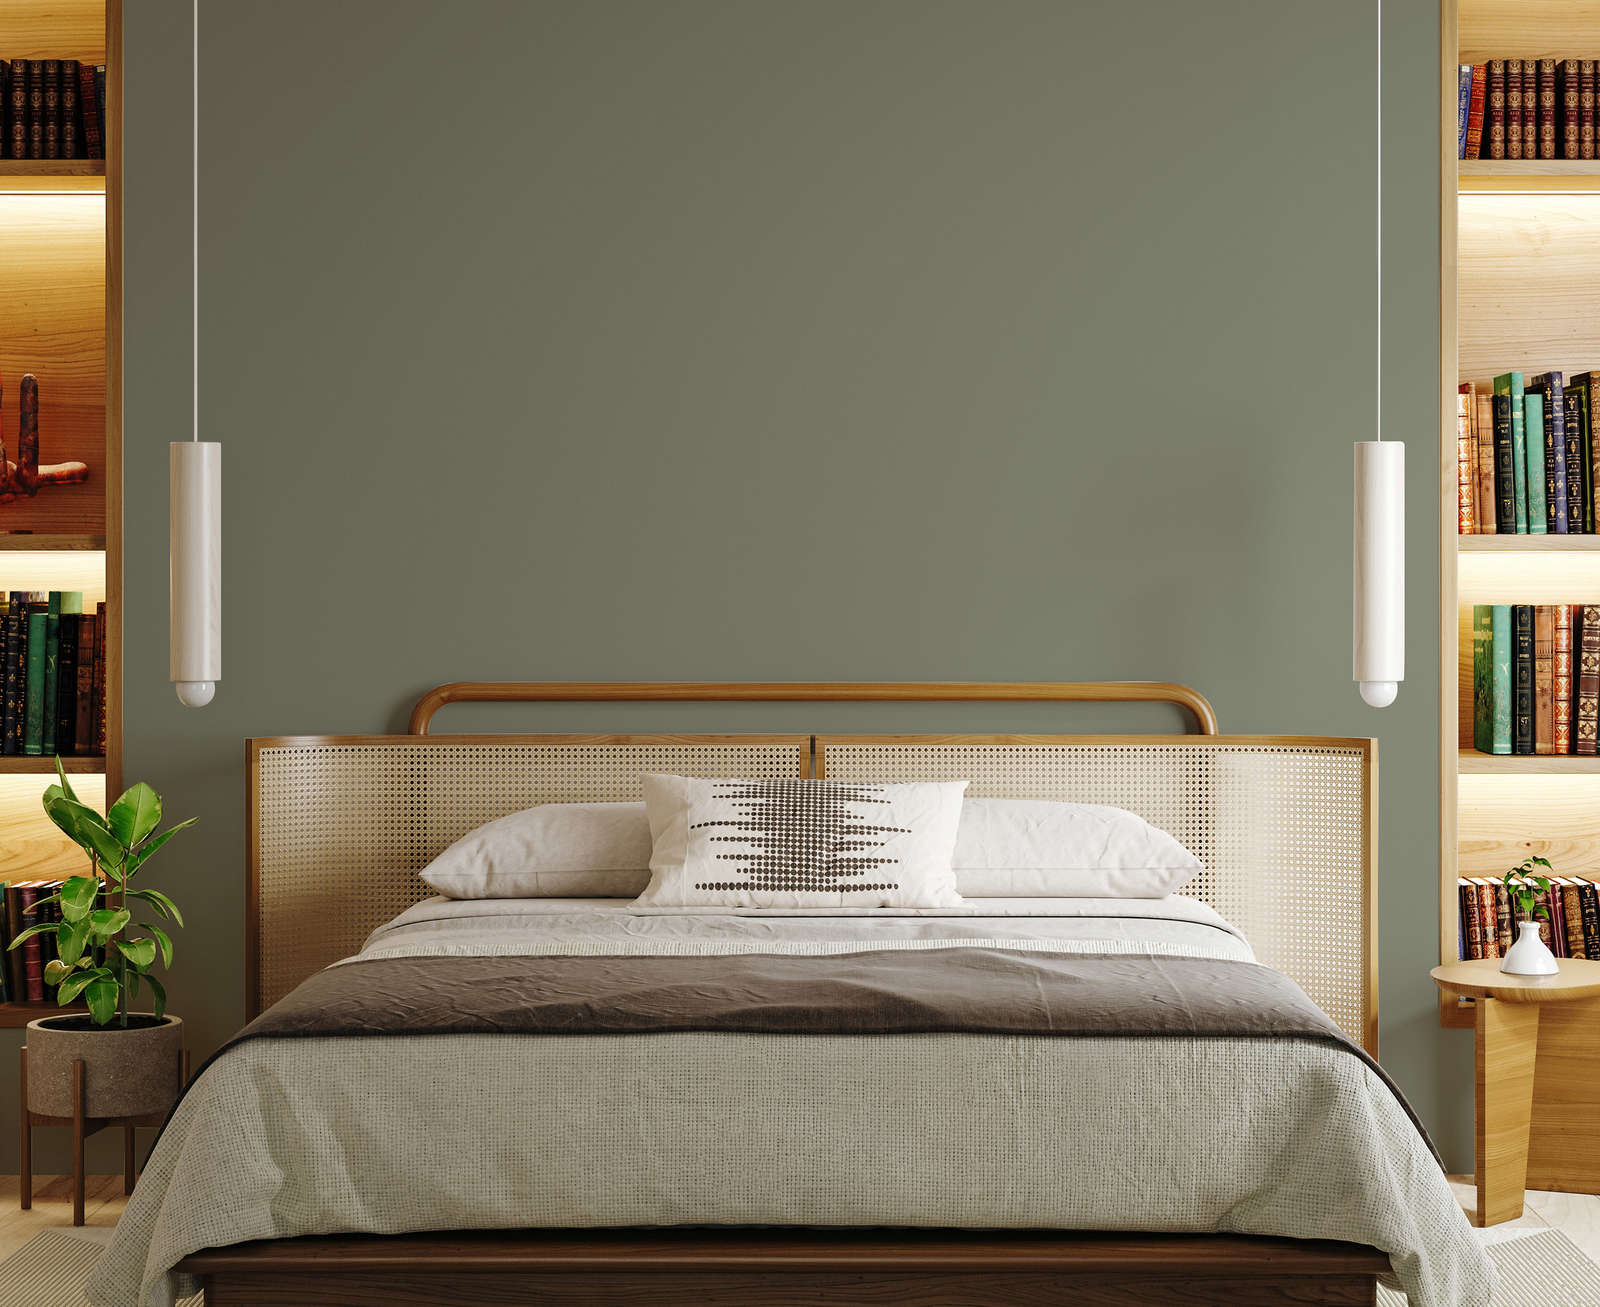             Premium Wall Paint Persuasive Olive Green »Talented calm taupe« NW706 – 5 litre
        